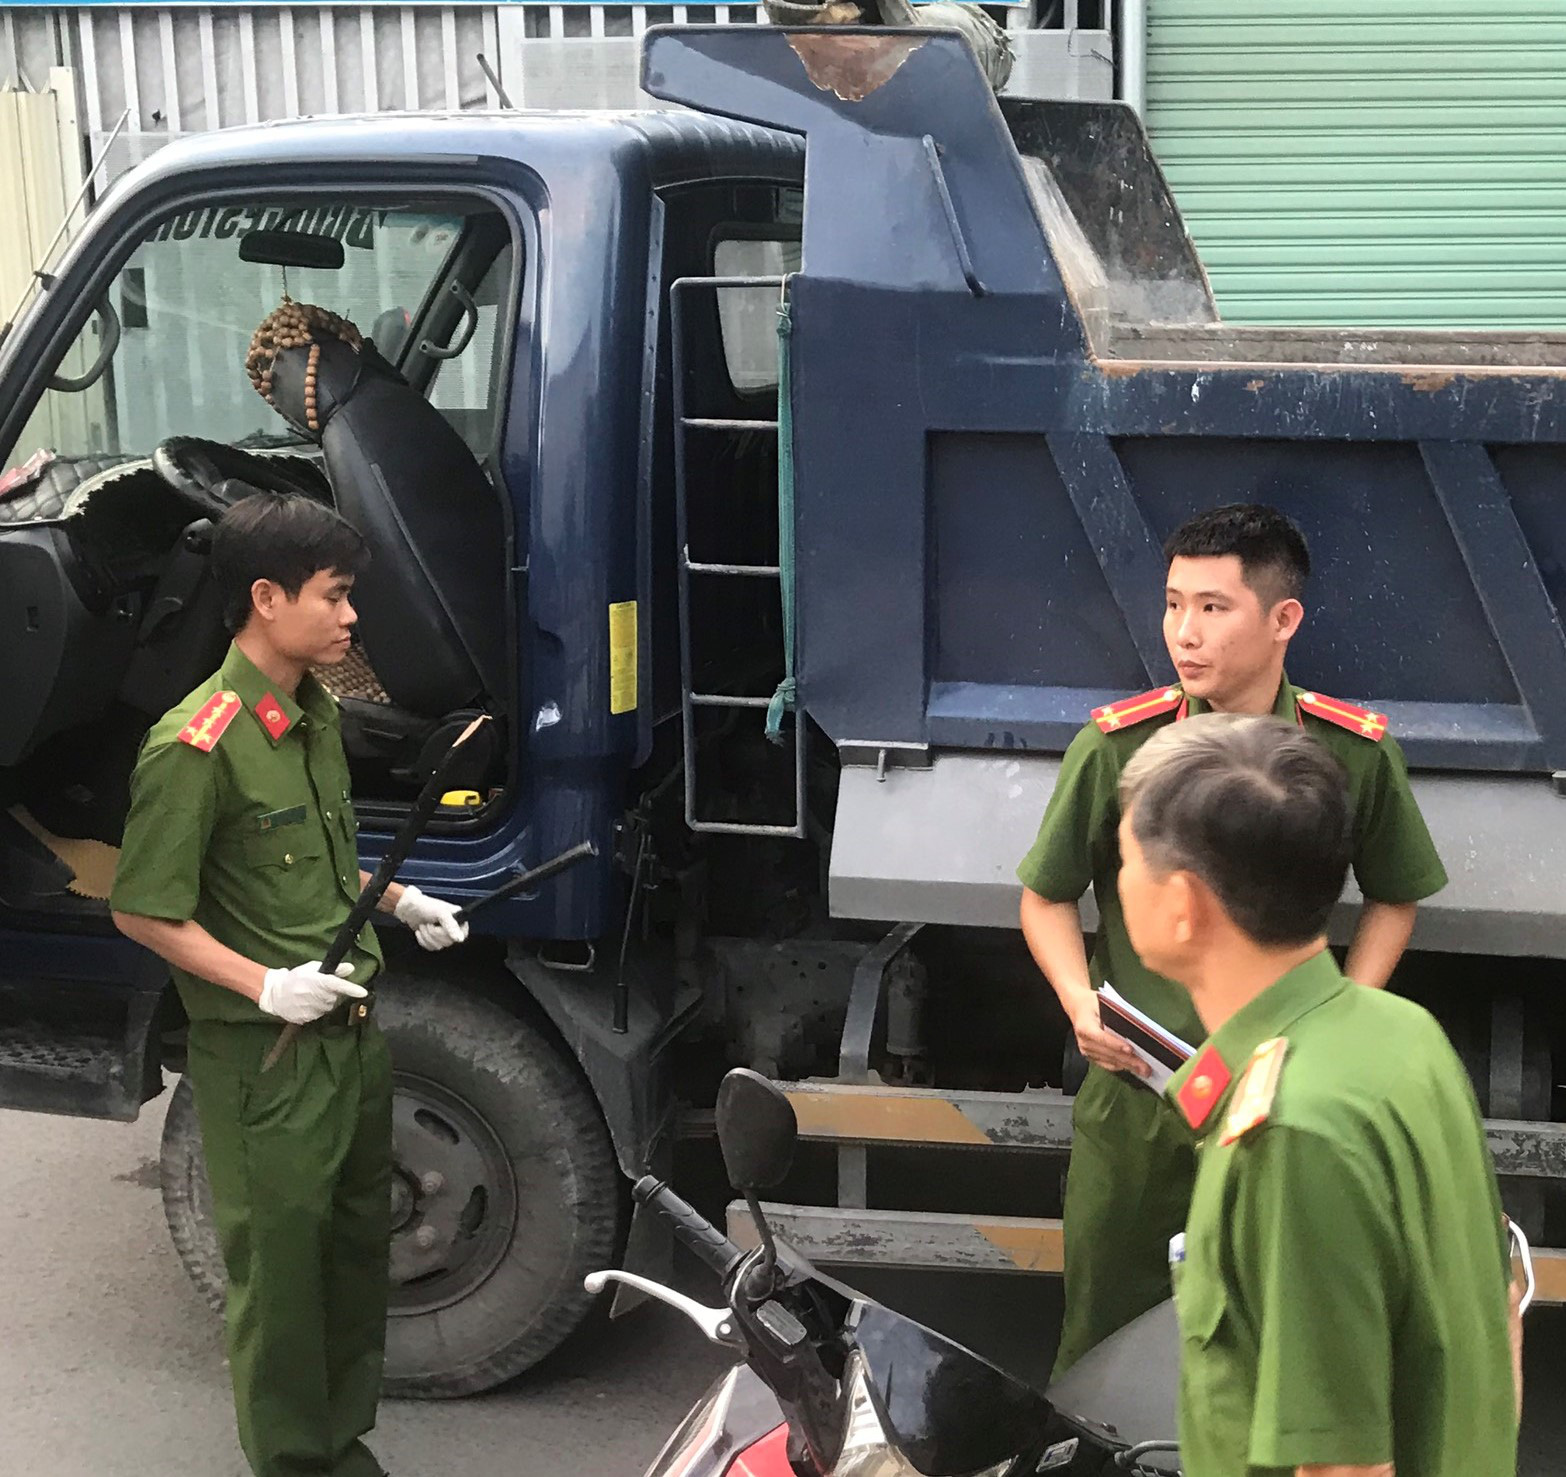 Cut-off Vietnamese trucker arrested for beating motorcyclist to death